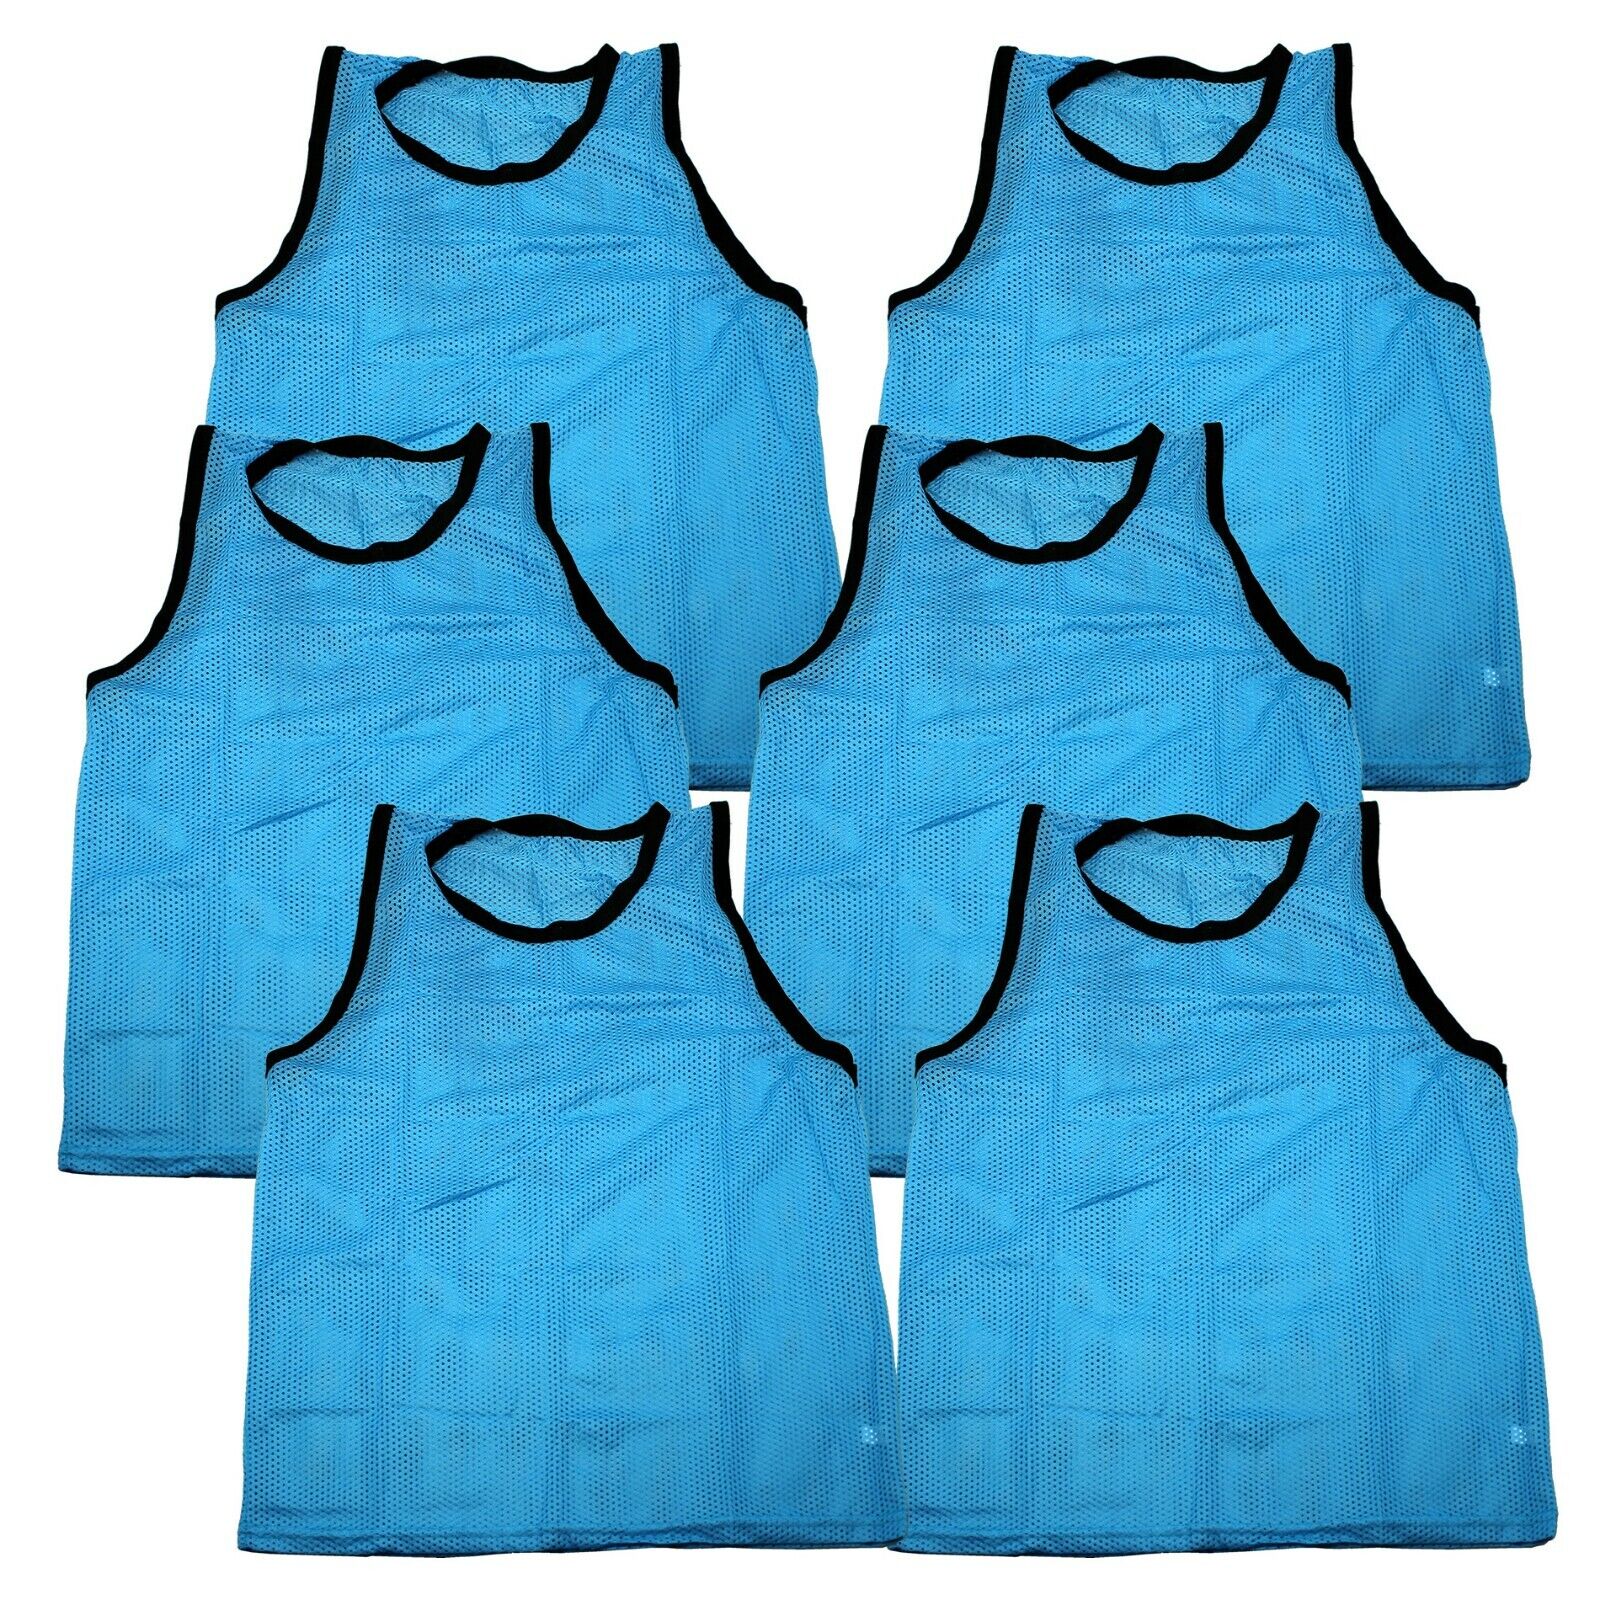 Great Choice Products Set Of 6 Light Blue Youth Scrimmage Vests -Pinnies Soccer , Softball Us Ship!